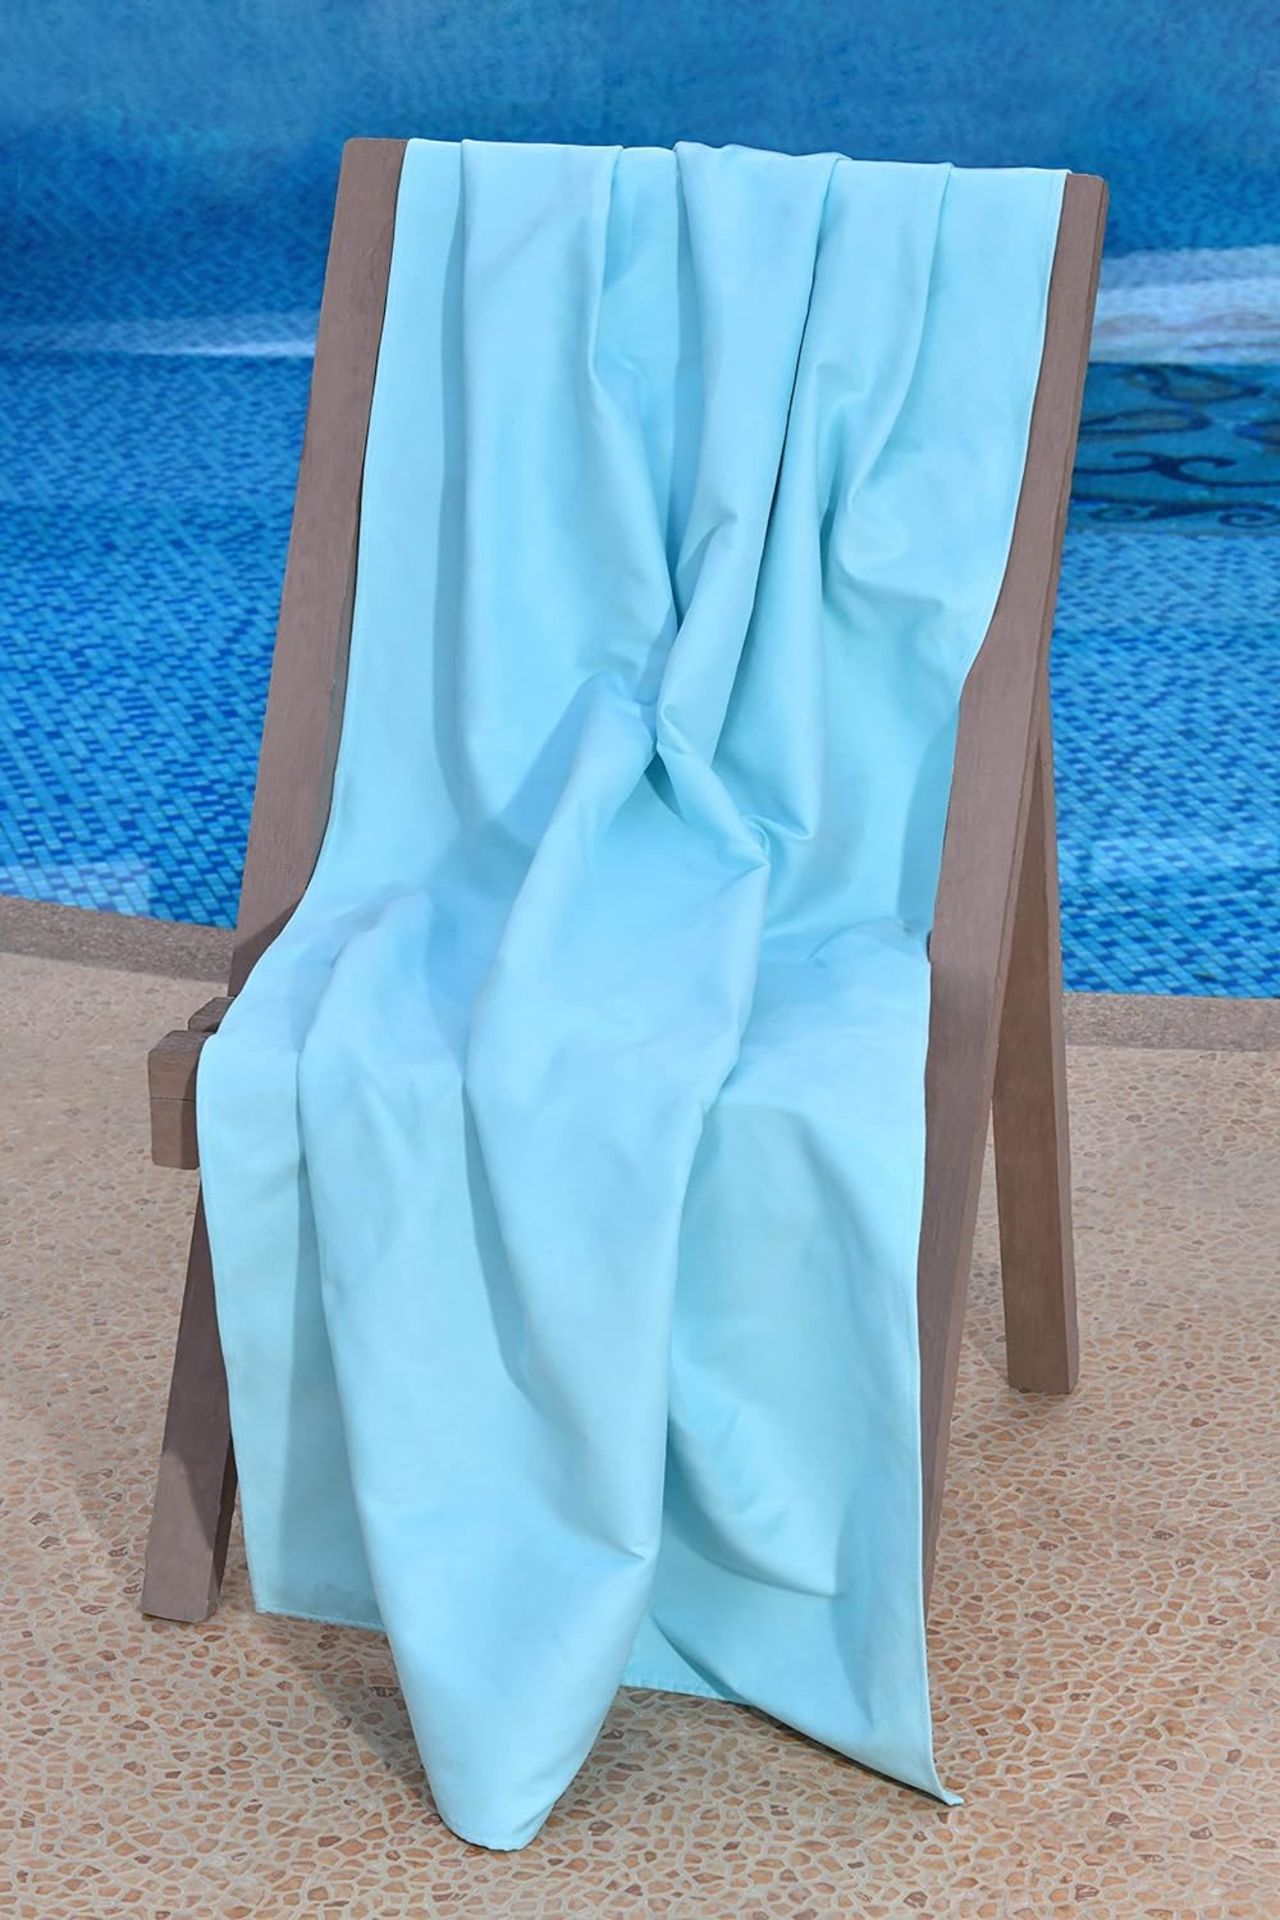 11x NEW & PACKAGED SLEEPDOWN Quick Dry Beach Towel 90 x 160cm With Carry Pouch - AQUA. RRP £21.99 - Image 2 of 4